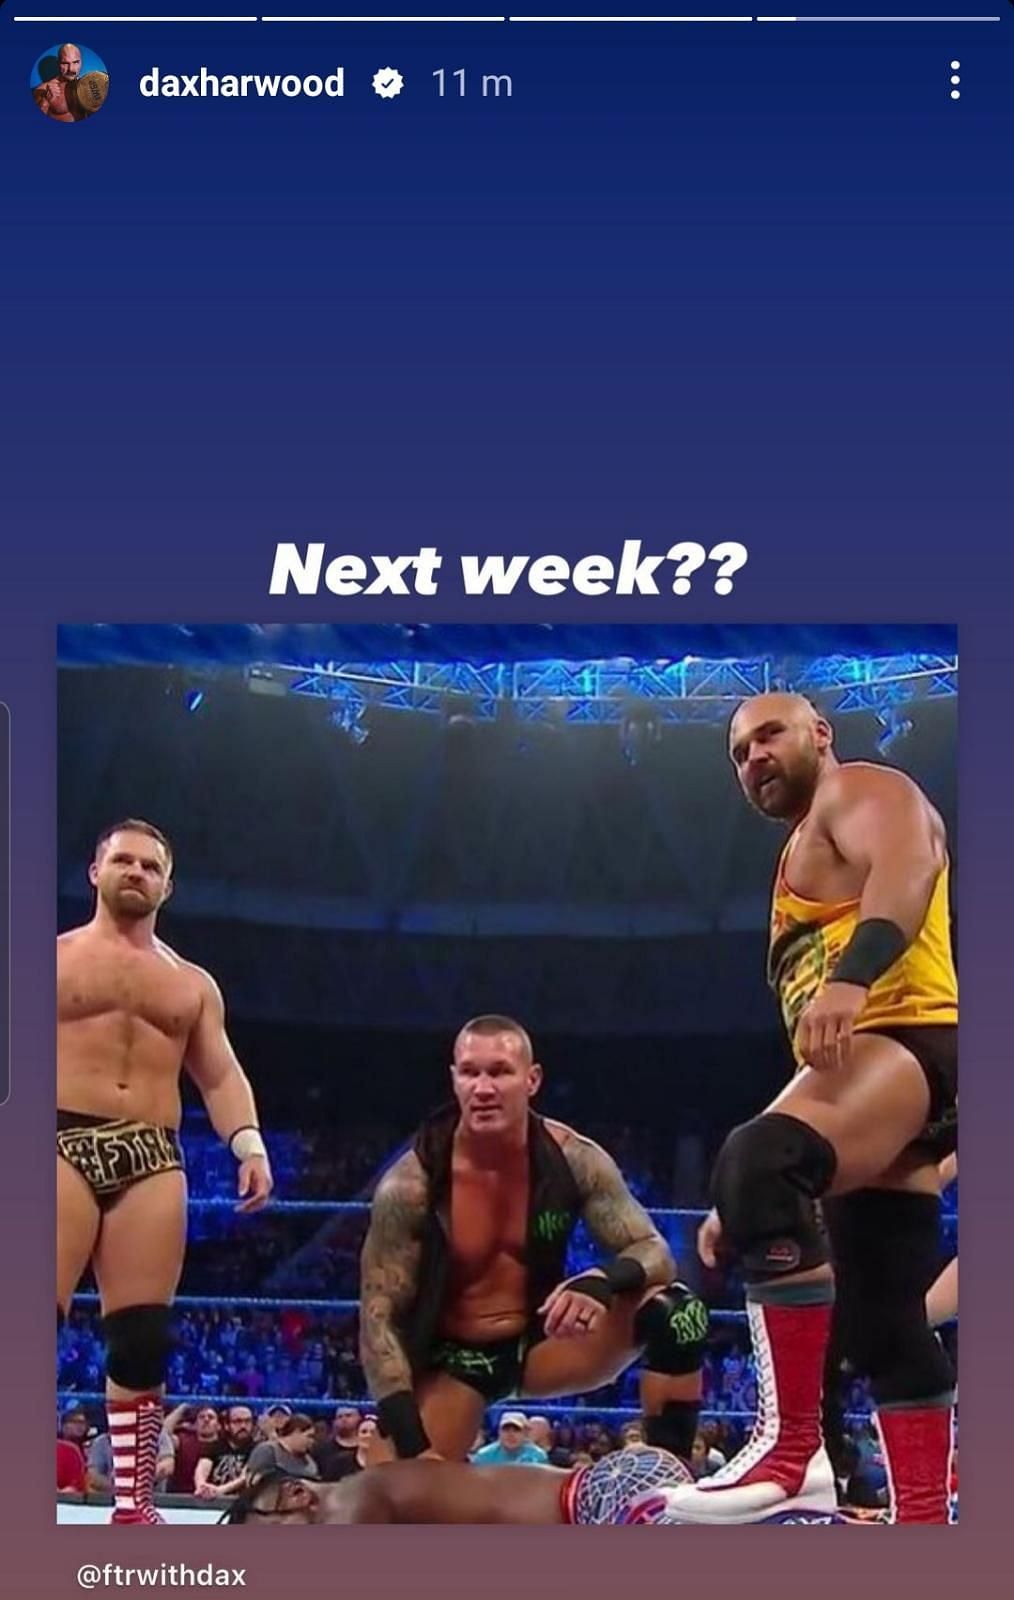 Dax Harwood shared the snap to his Instagram story with an interesting caption.